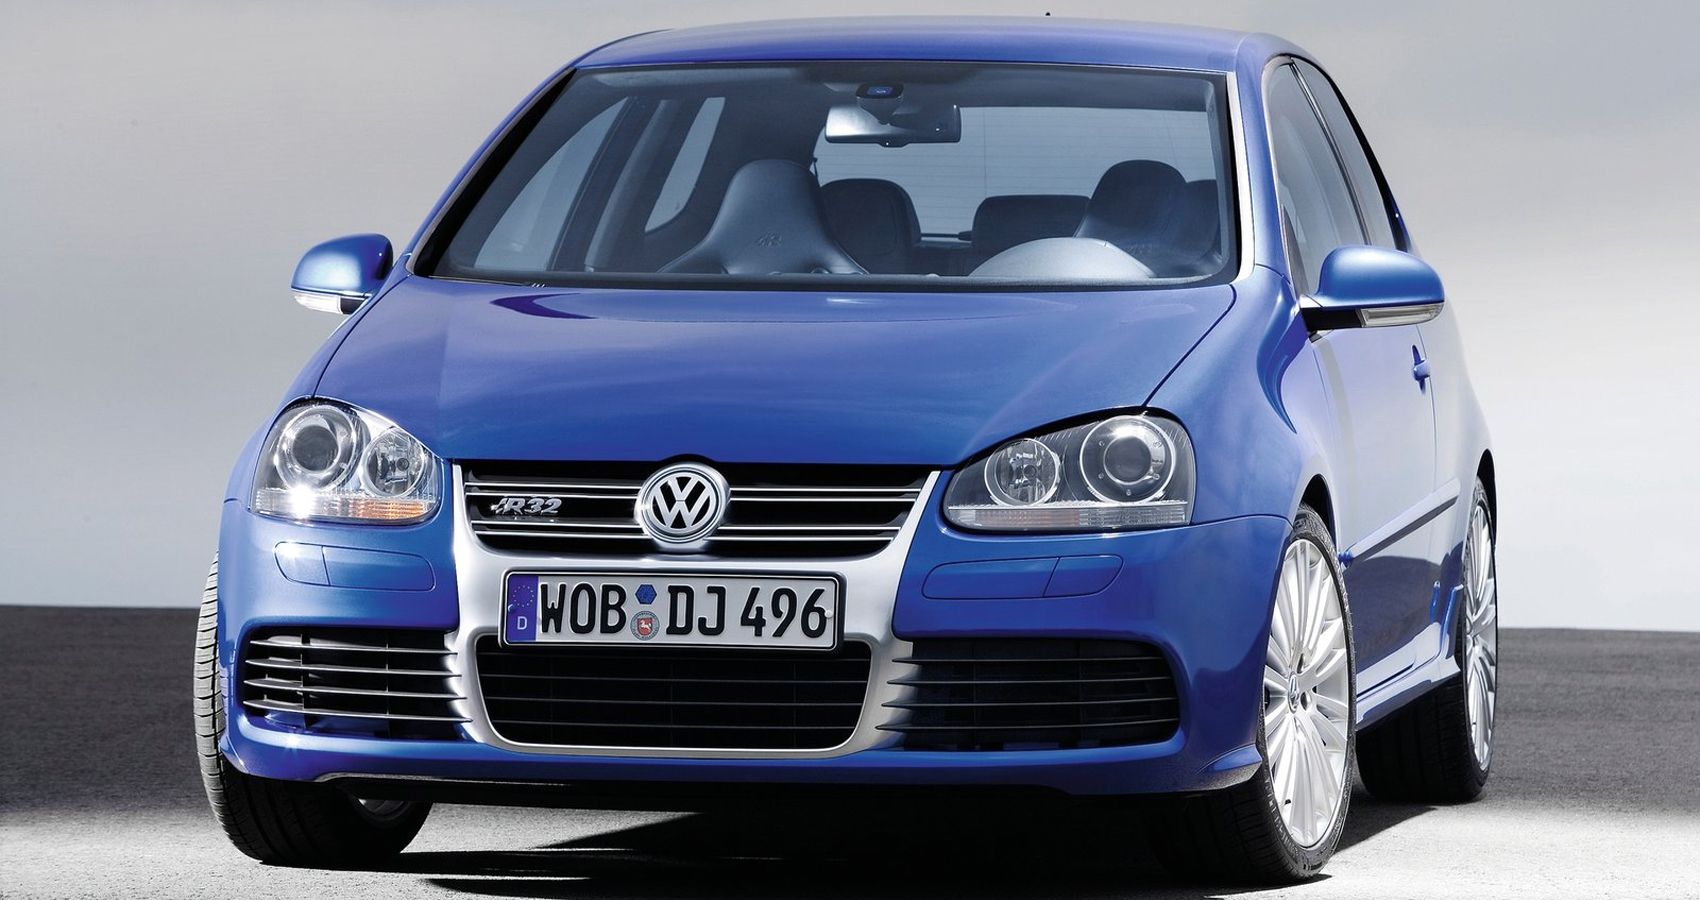 Volkswagen Golf Mk4 R32, Is this one to watch?